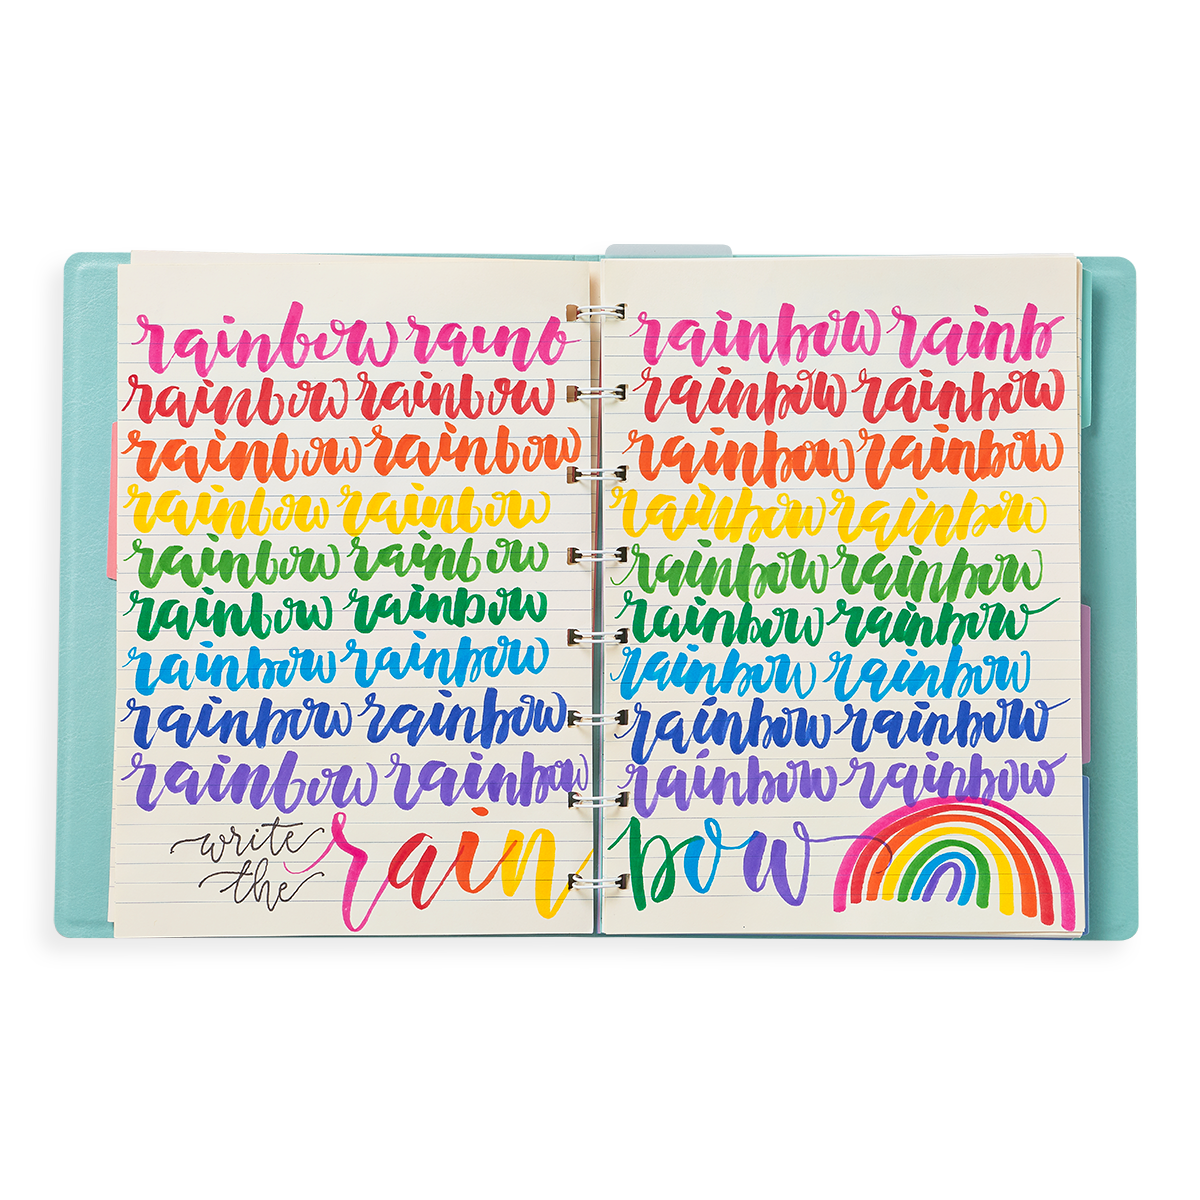 Image of planner open with rainbow written in brush lettering in rainbow colors